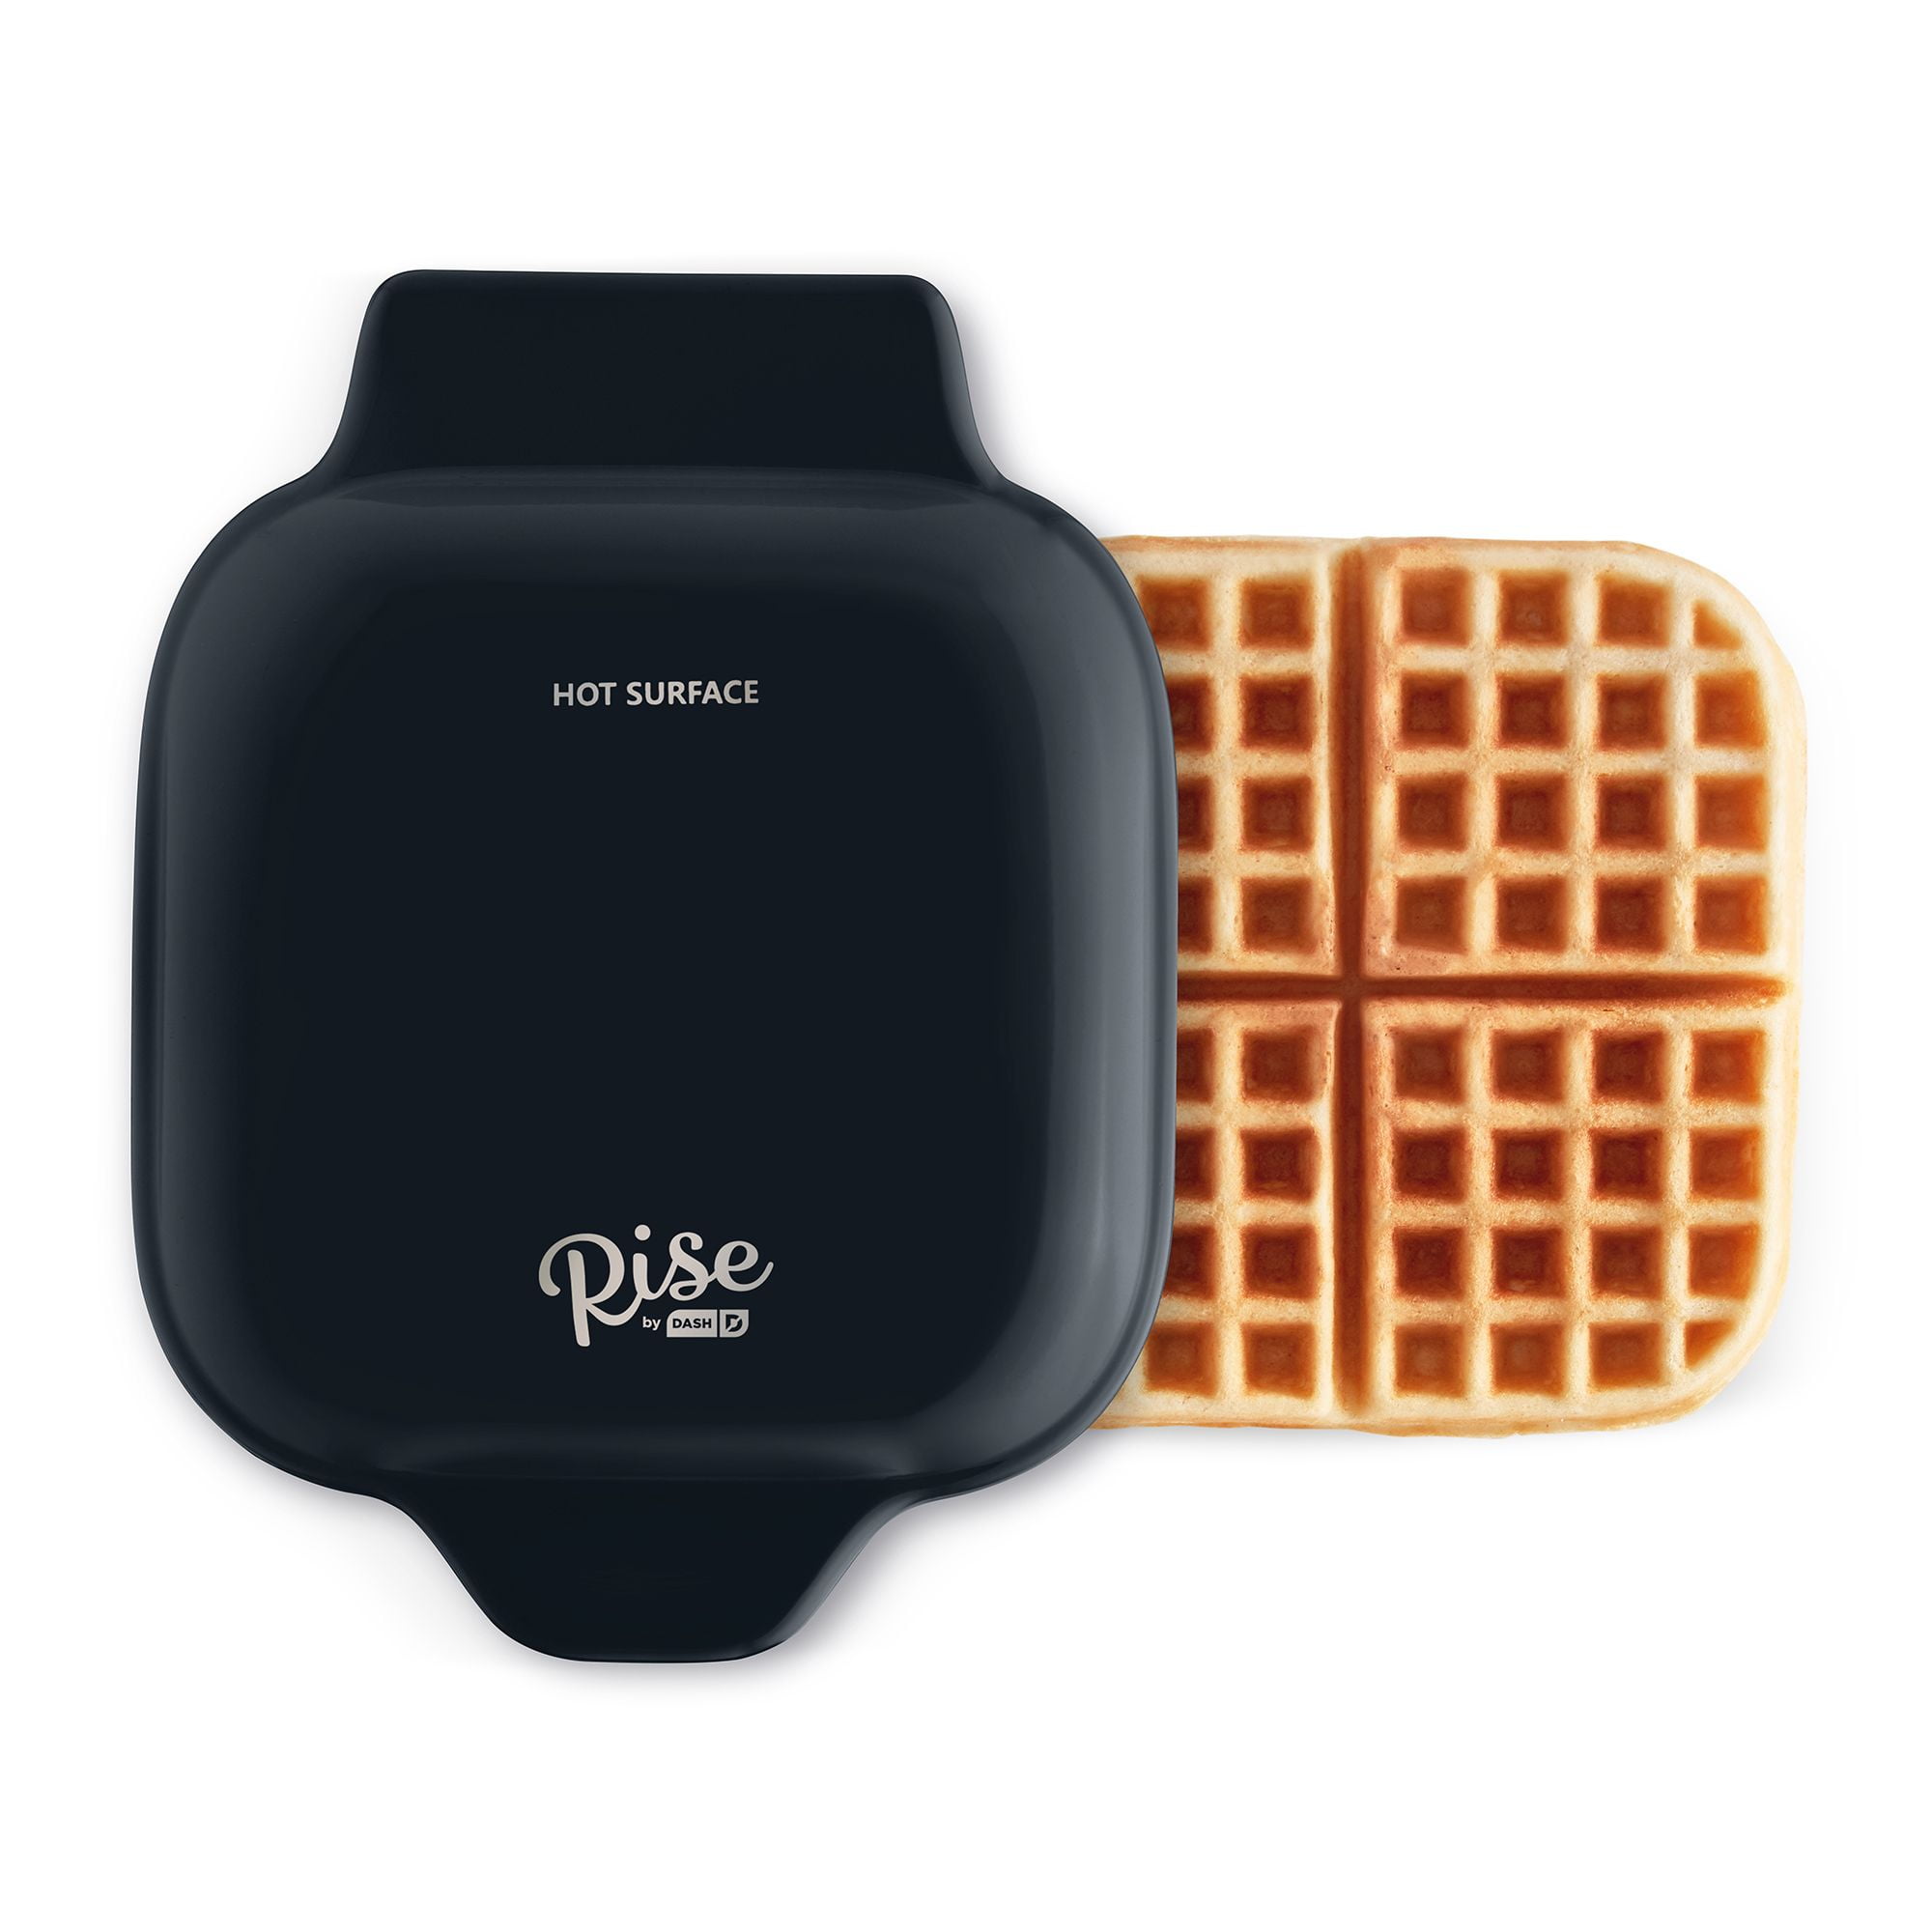 DASH DMW001BK Mini Maker for Individual Waffles, Hash Browns, Keto Chaffles  with Easy to Clean, Non-Stick Surfaces, 4 Inch, Black